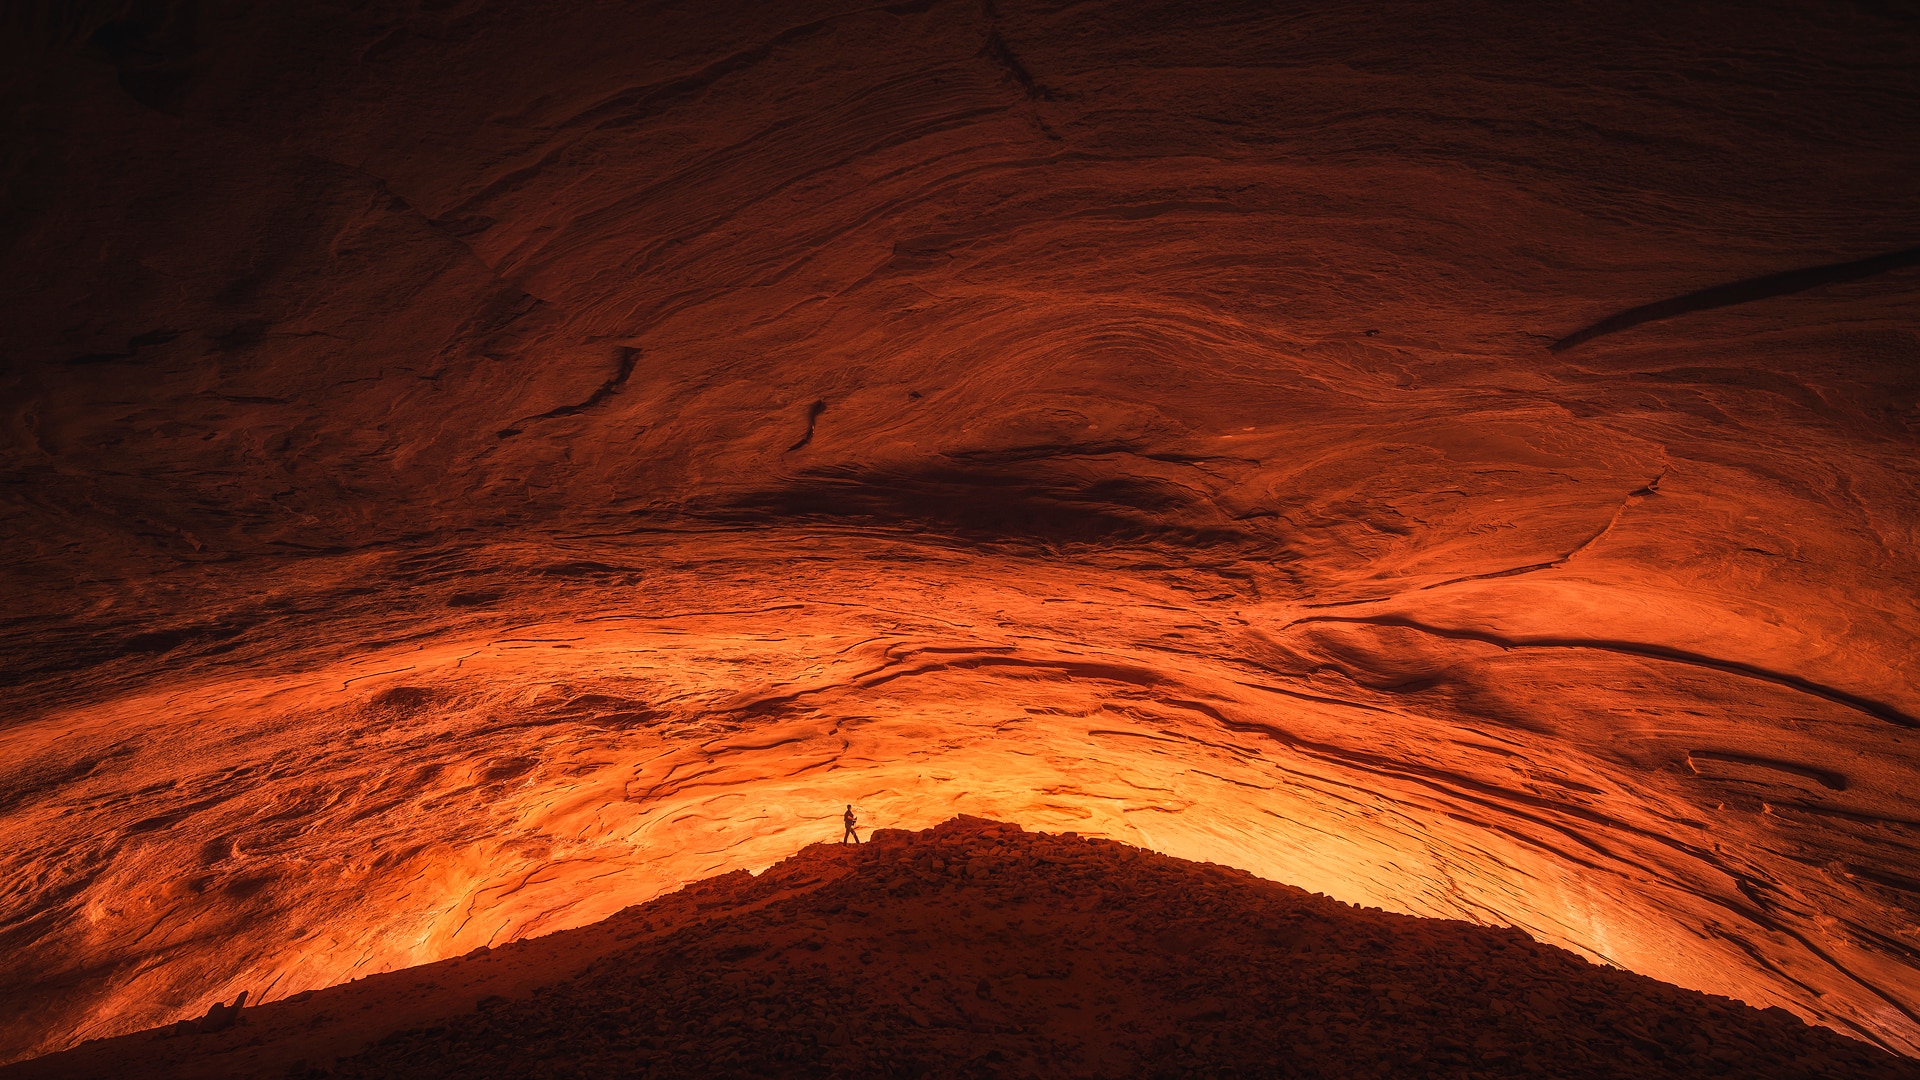 A lone figure, silhouetted against orange sandstone.